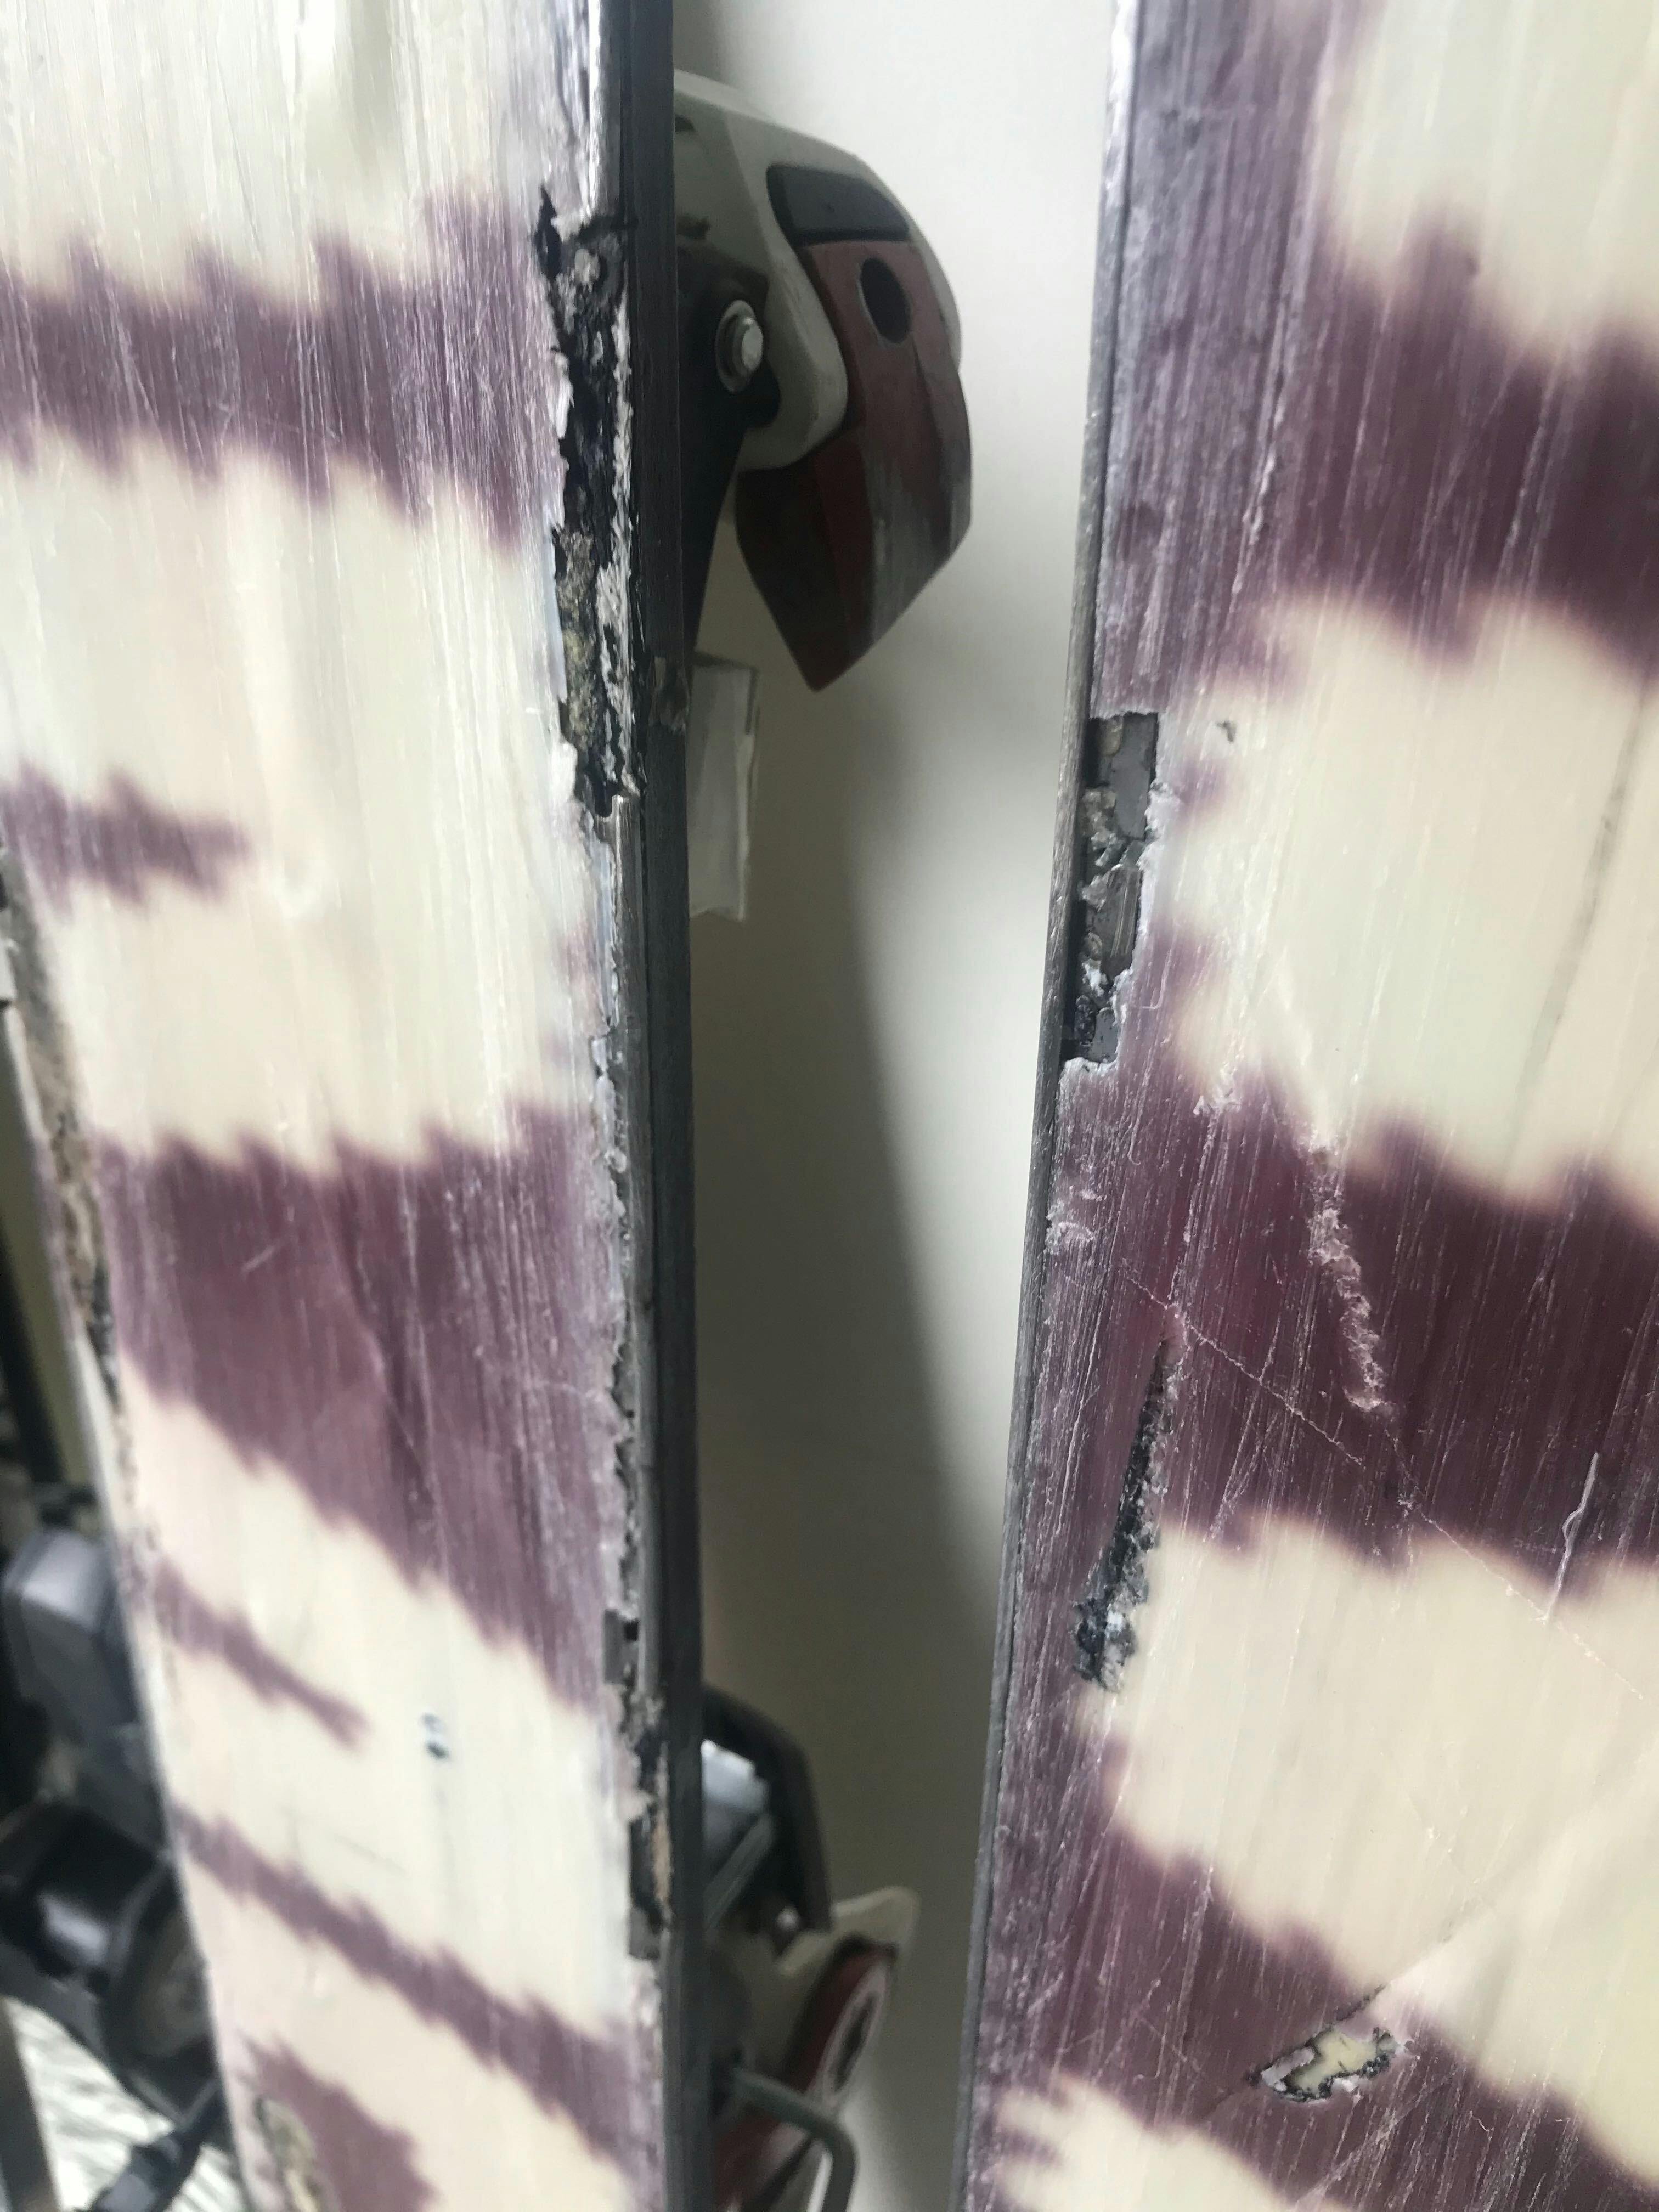 A pair of broken down purple and white skis